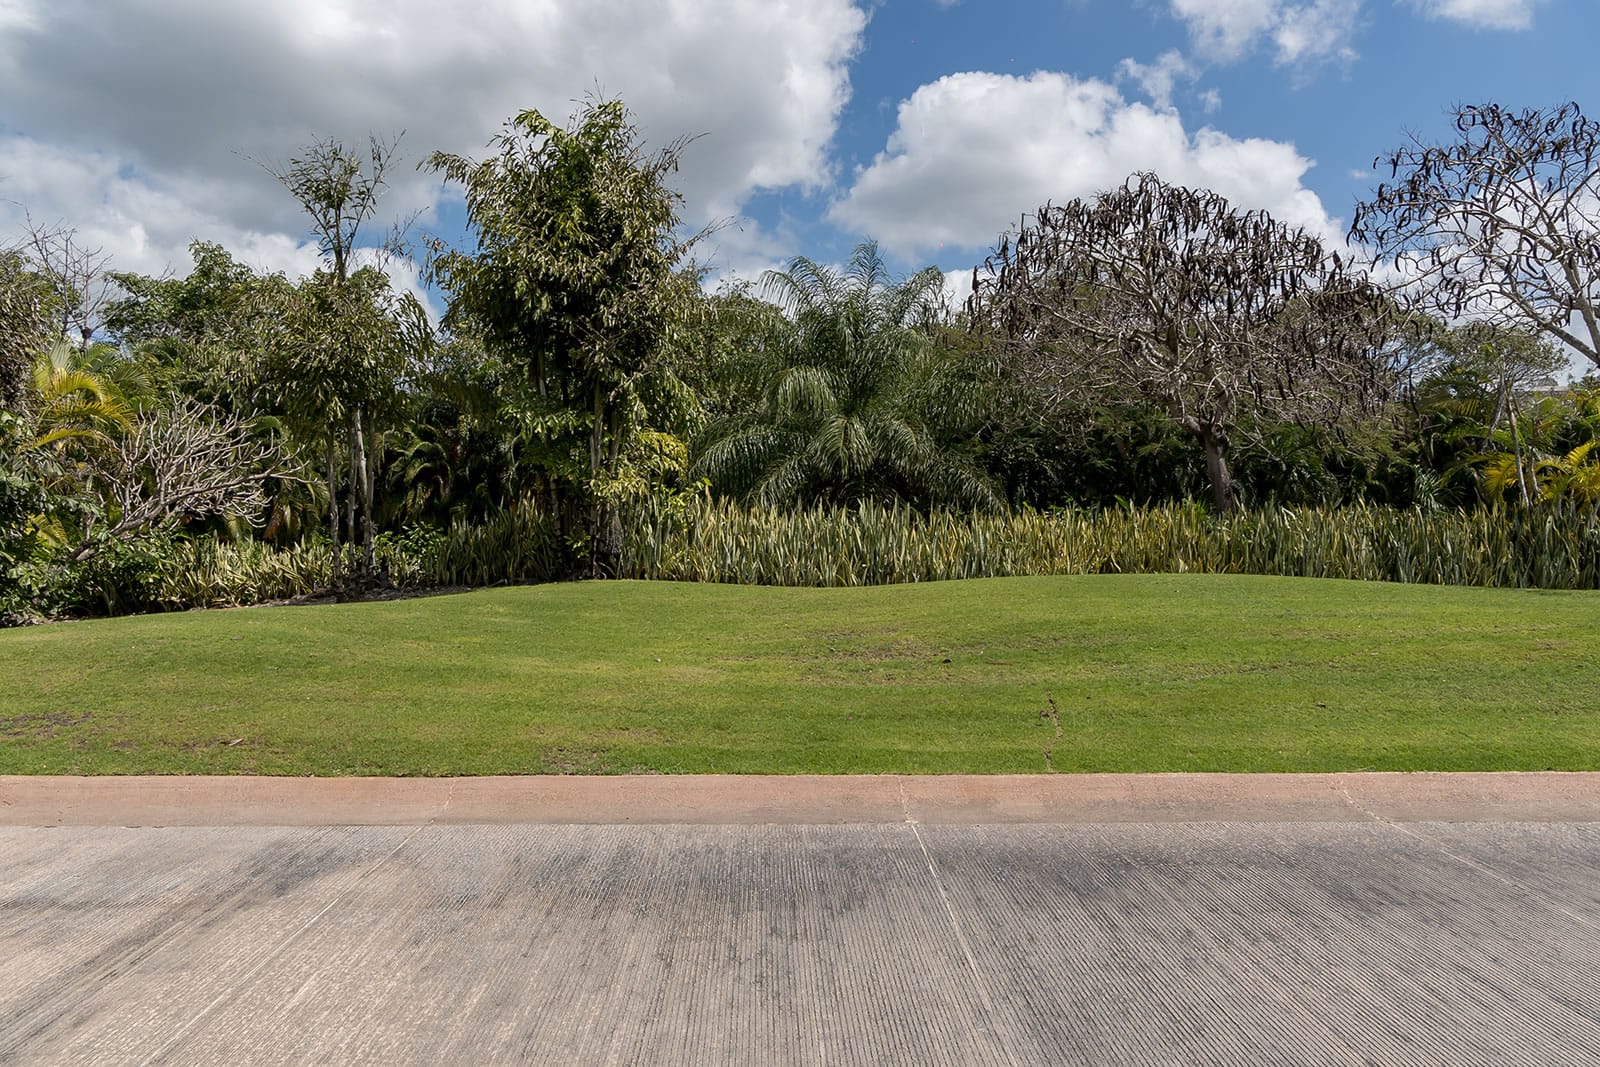  Acre Home Site for Sale, Yucatan Country Club, Merida, Mexico - 7th  Heaven Properties